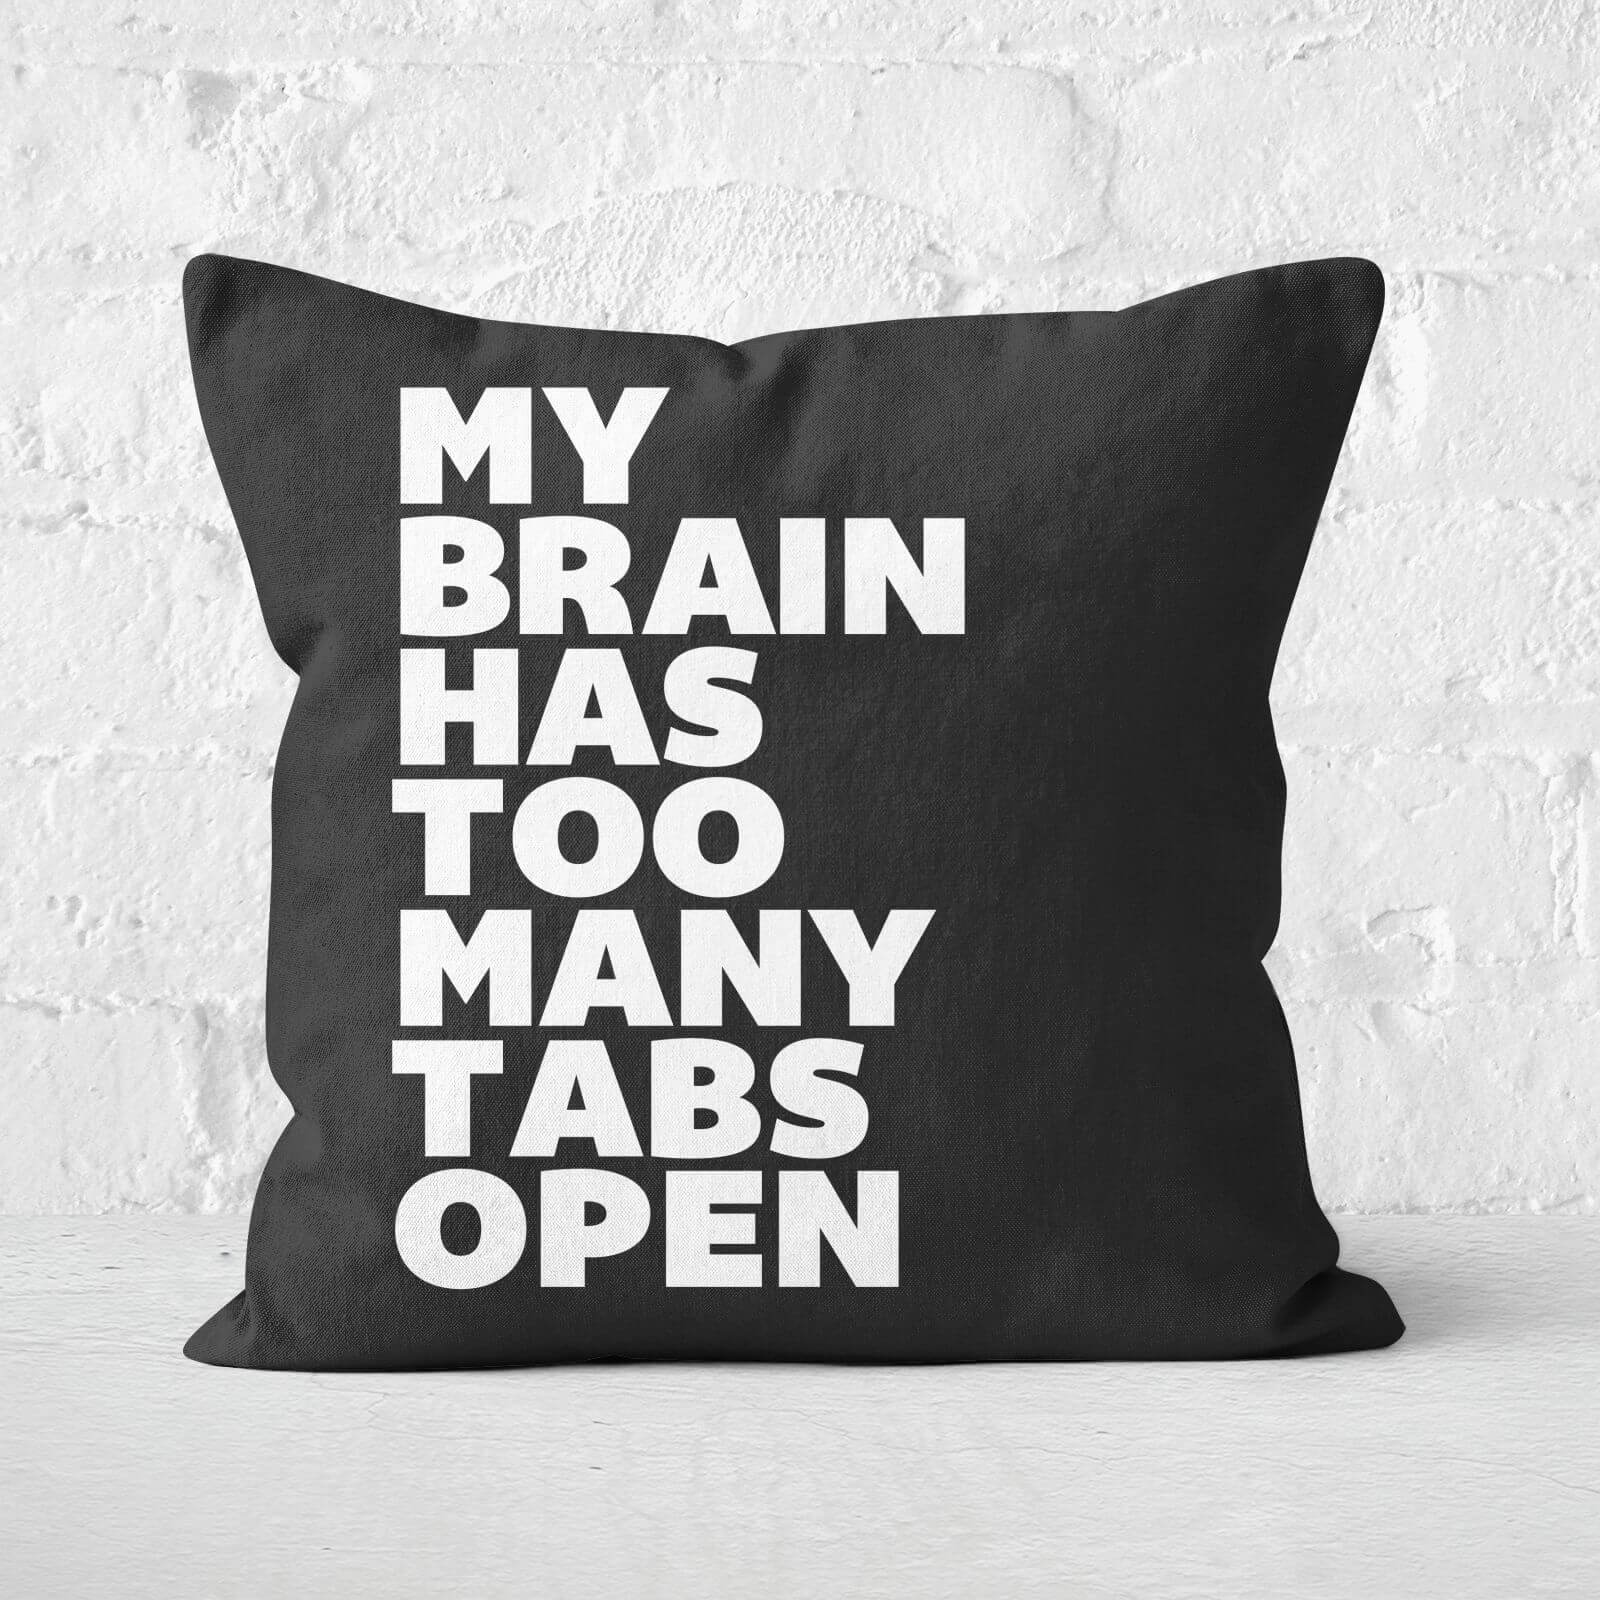 The Motivated Type My Brain Has Too Many Tabs Open Square Cushion - 60x60cm - Soft Touch